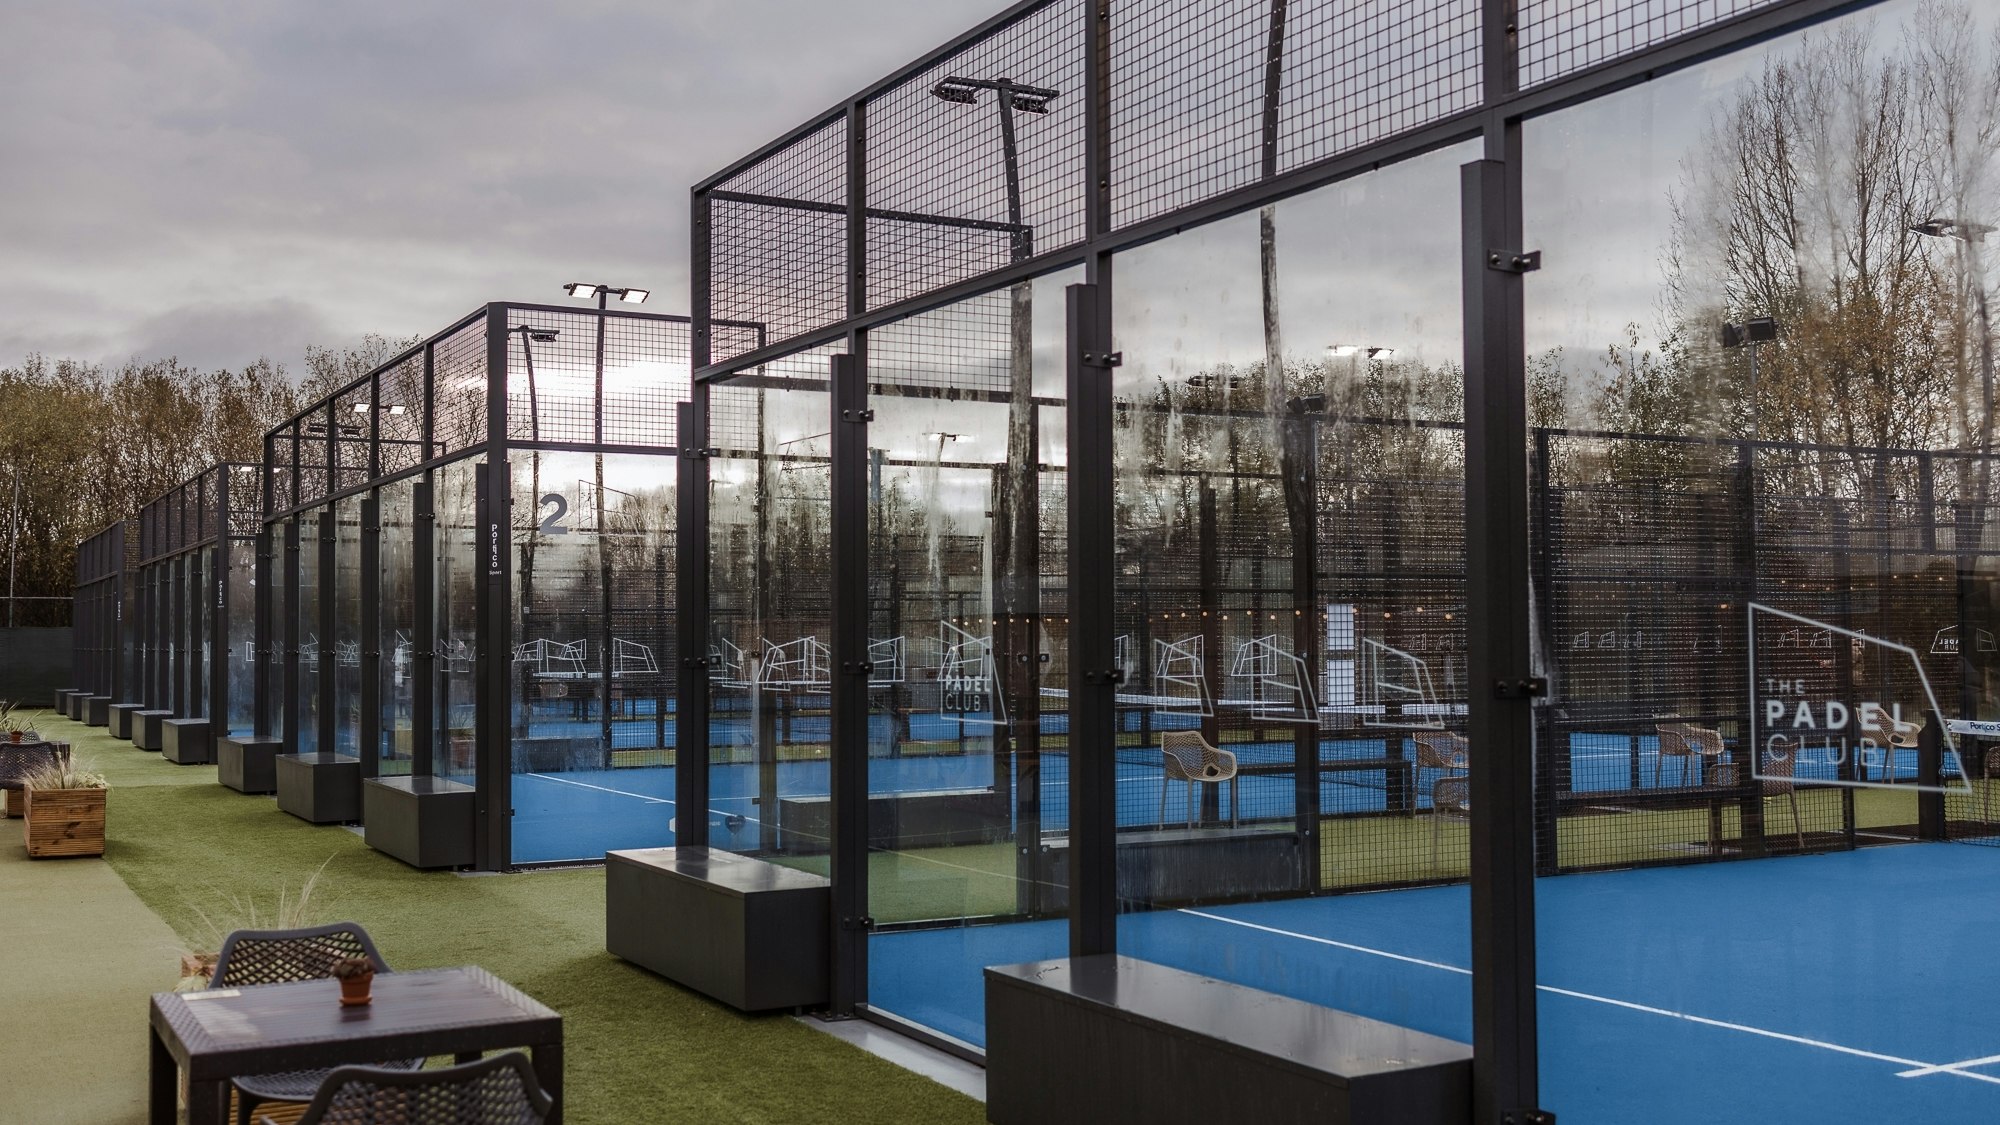 SOLD OUT: MYP x The Padel Club Social – 08.02.23